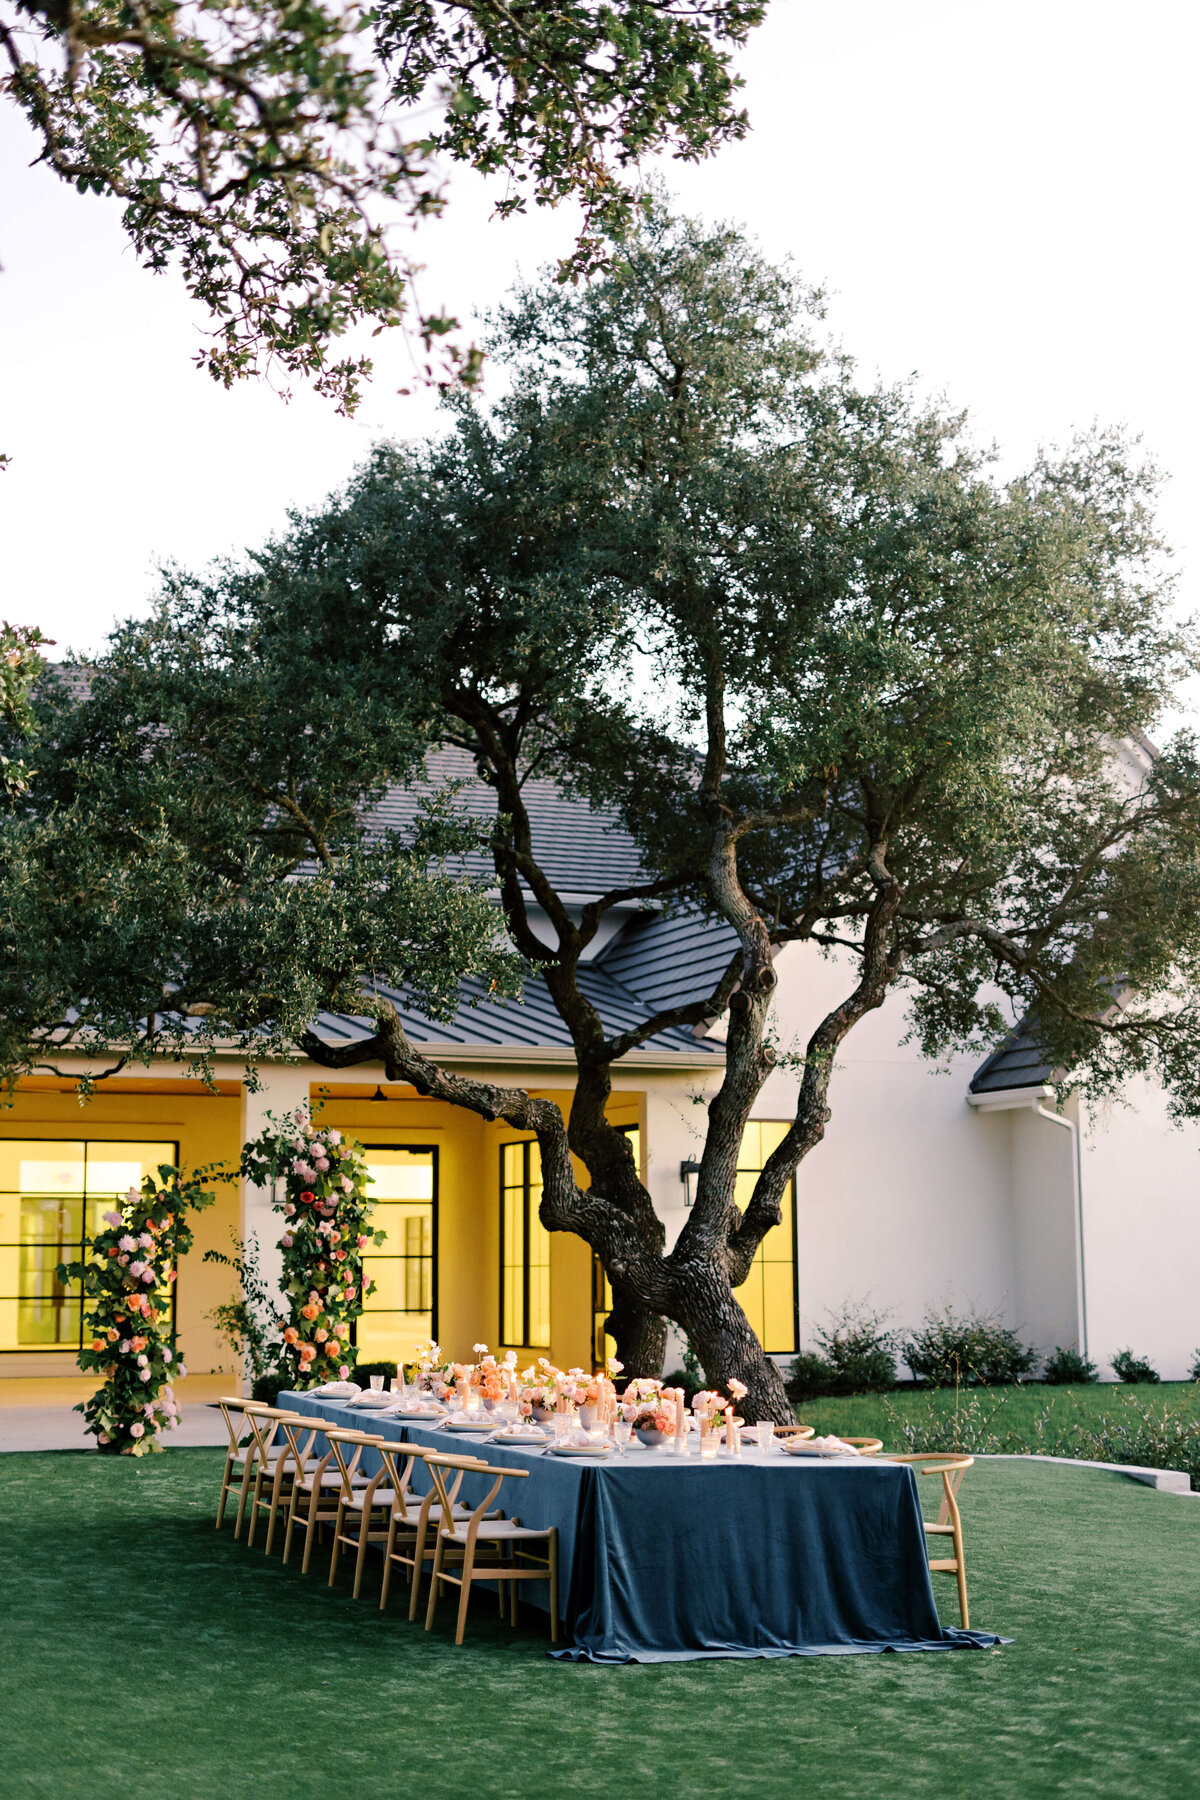 An intimate al-fresco reception at The Arlo, overlooking the Texas Hill Country